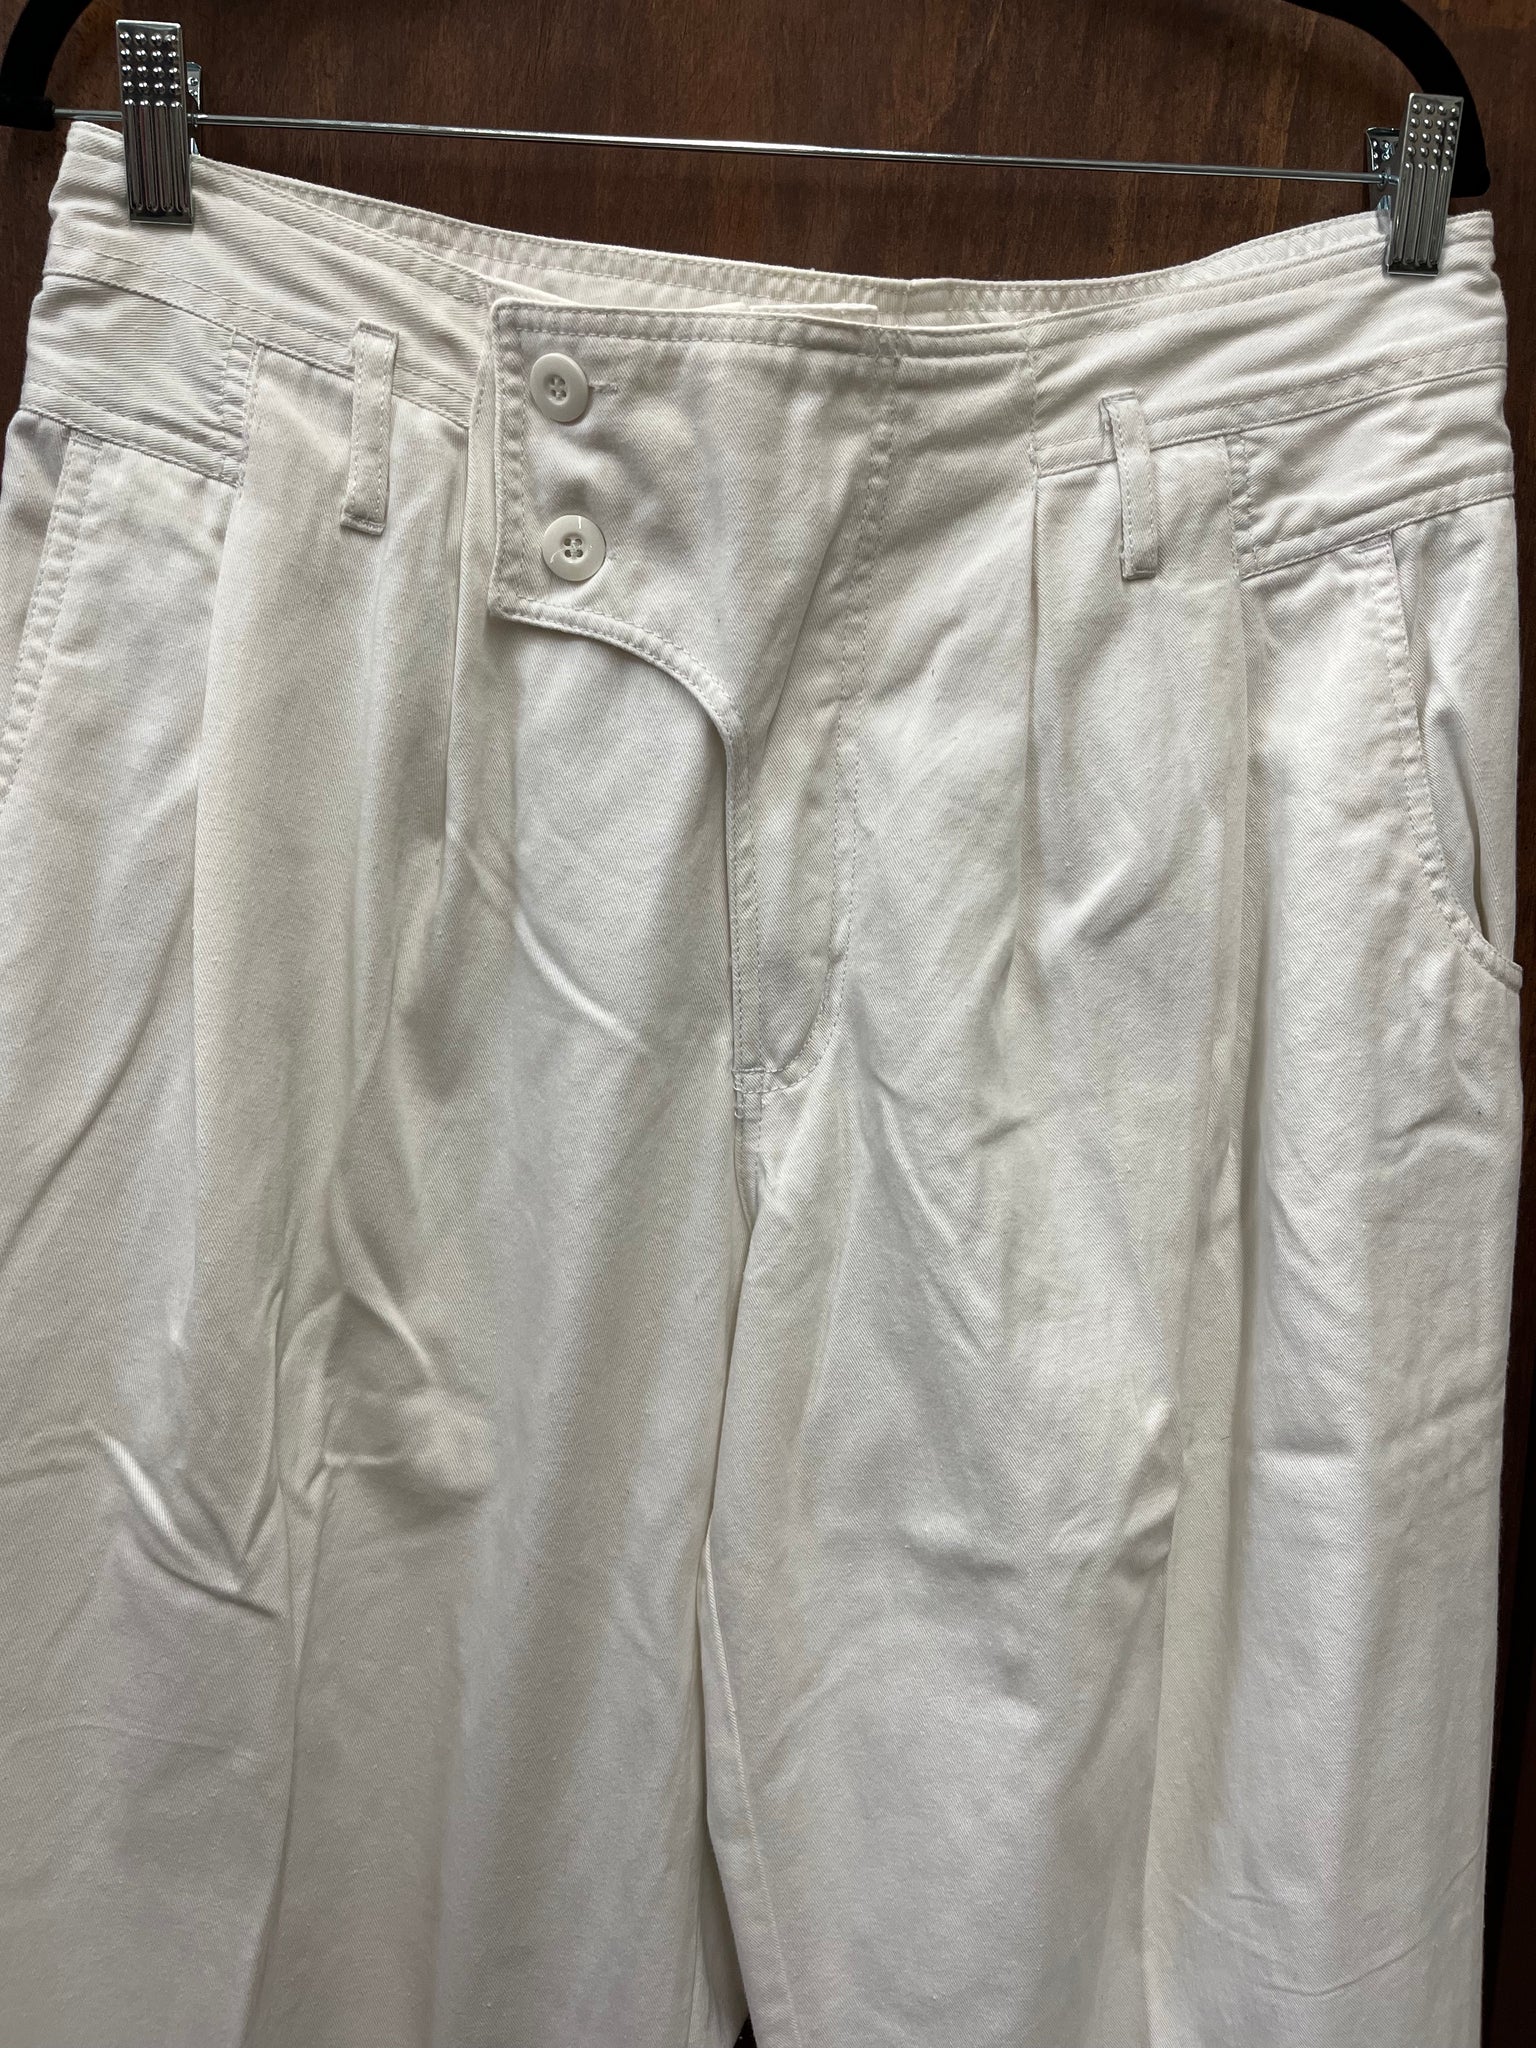 1990s MENS PANTS- White pleated with waistline button detail